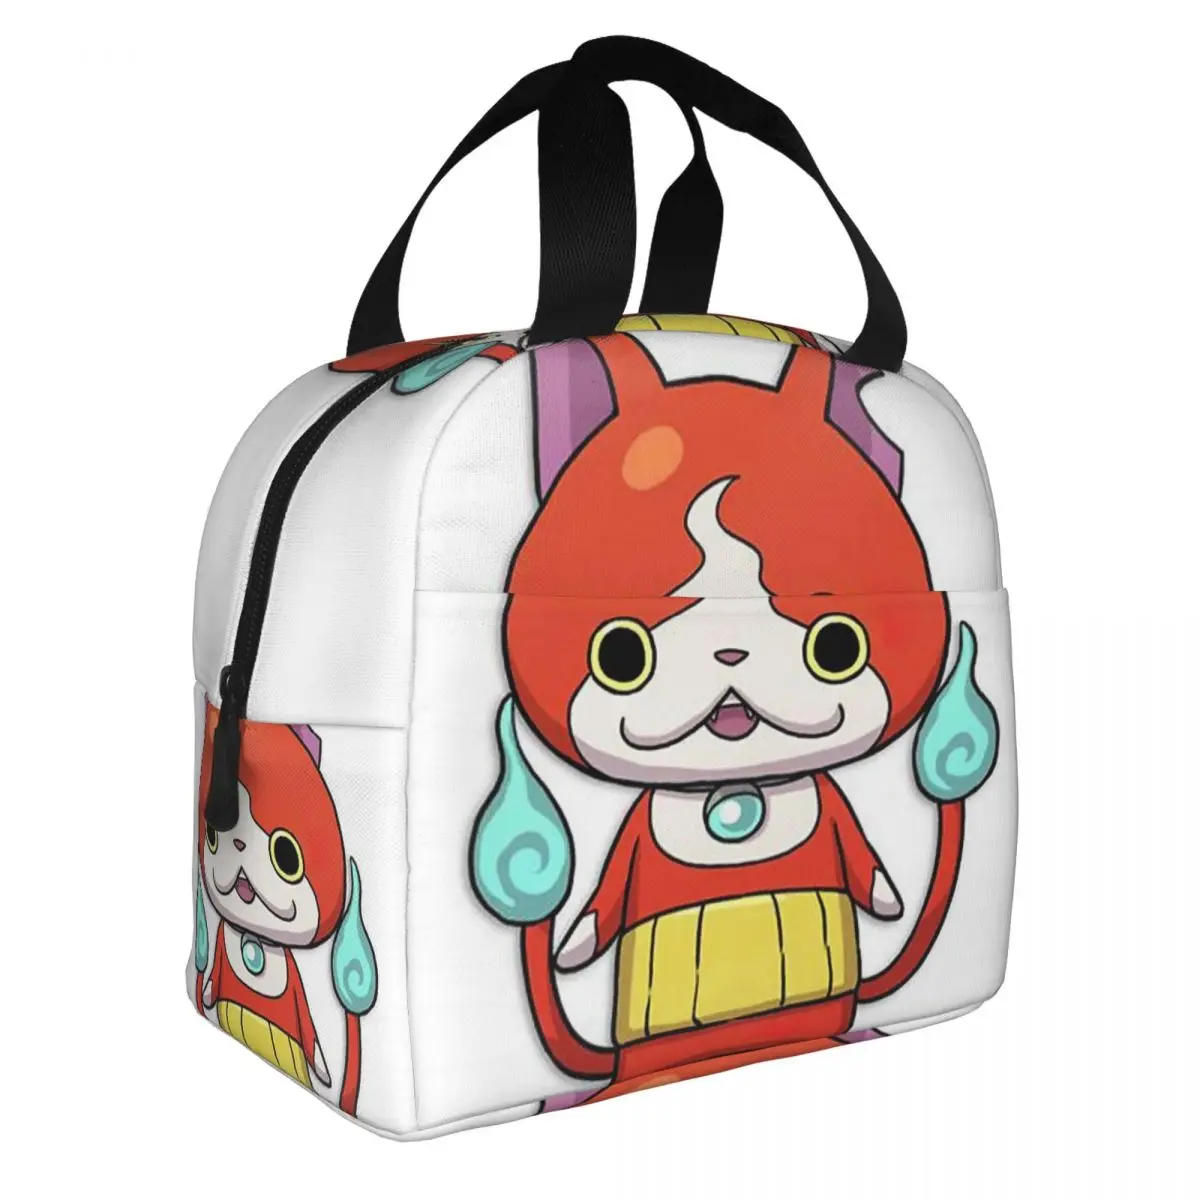 Yo Kai Watch Lunch Bento Bags Portable Aluminum Foil thickened Thermal Cloth Lunch Bag for Women Men Boy